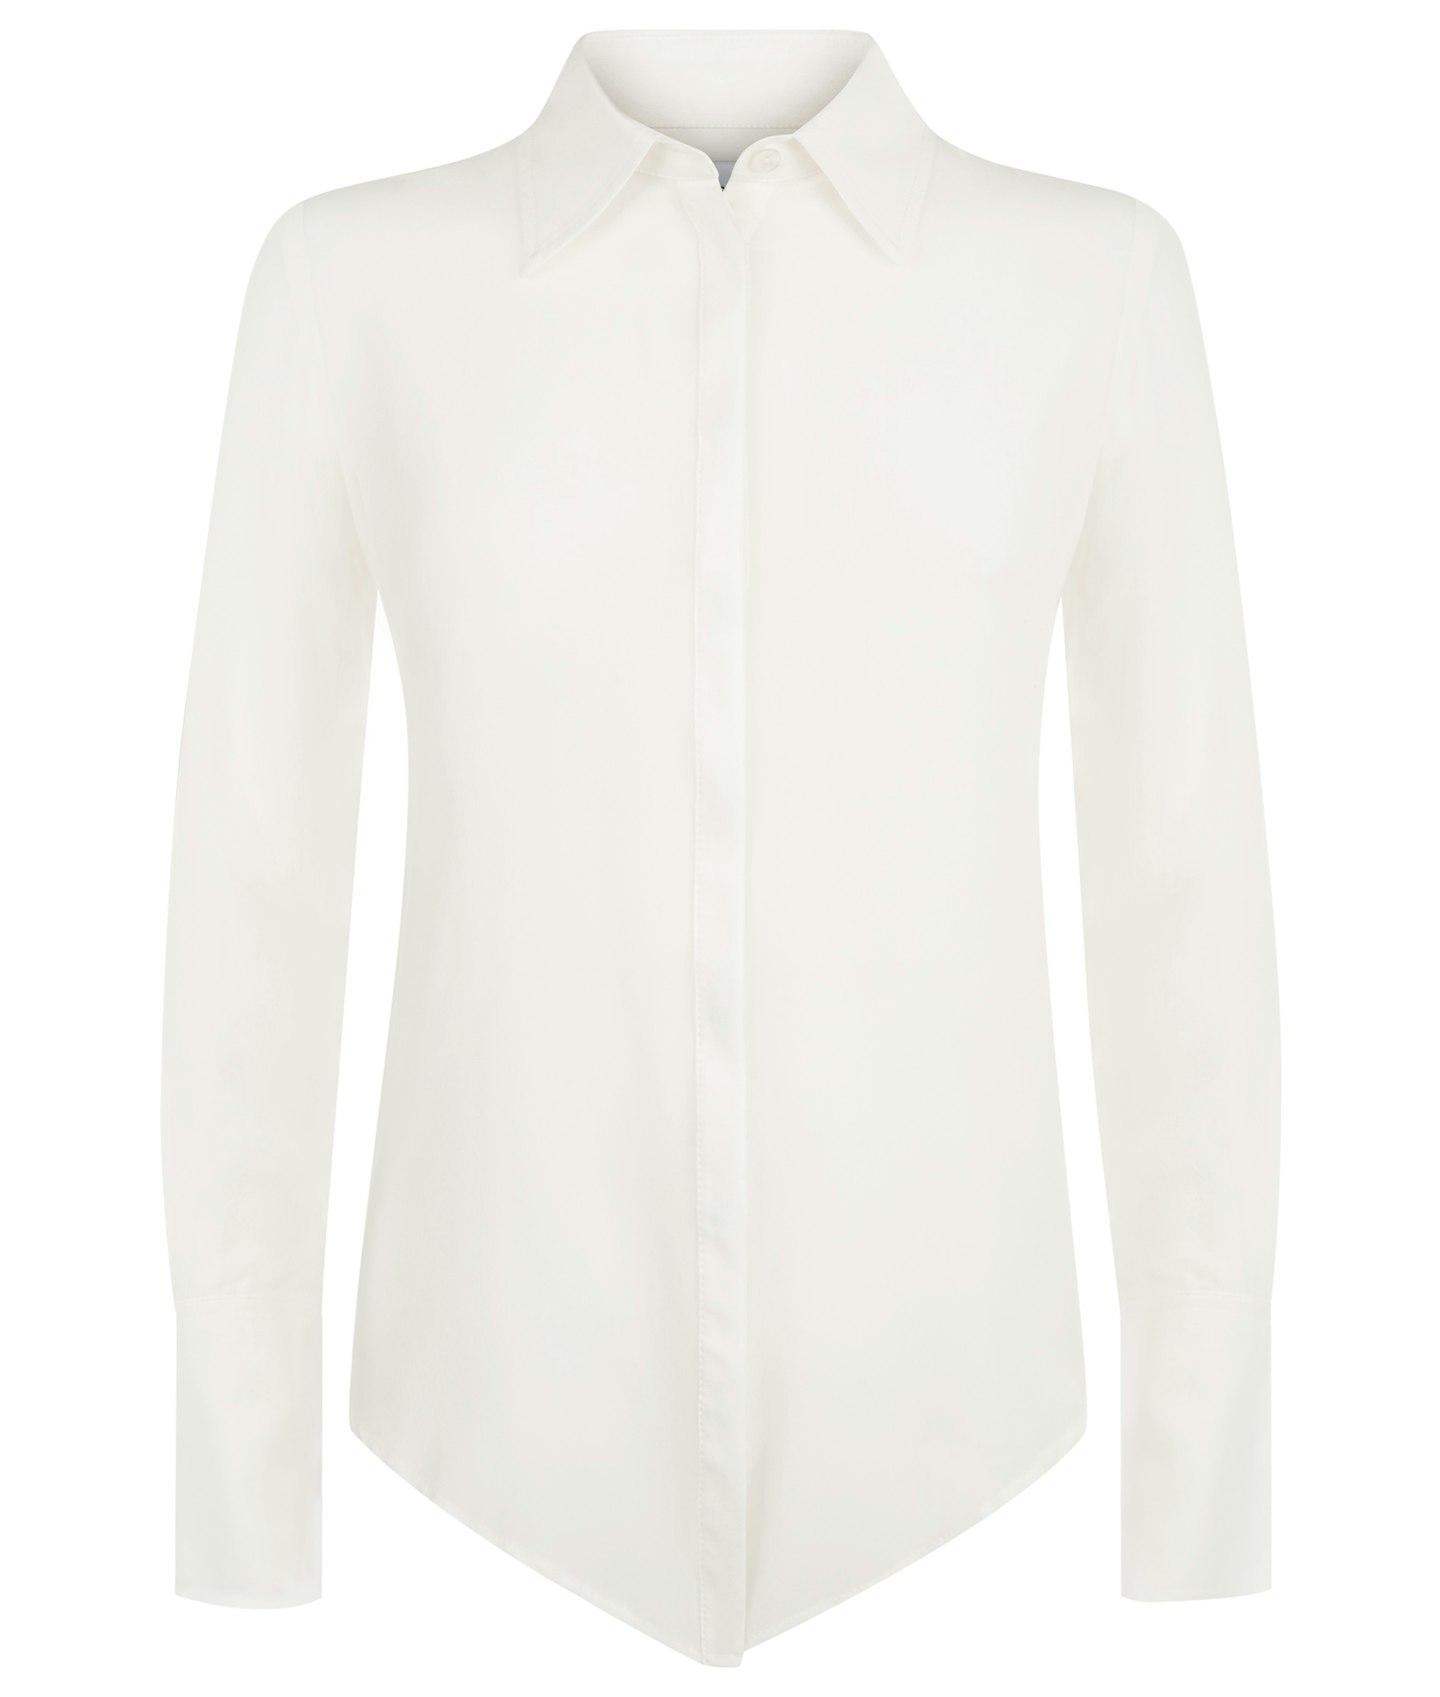 Best White Shirts For Women 2023